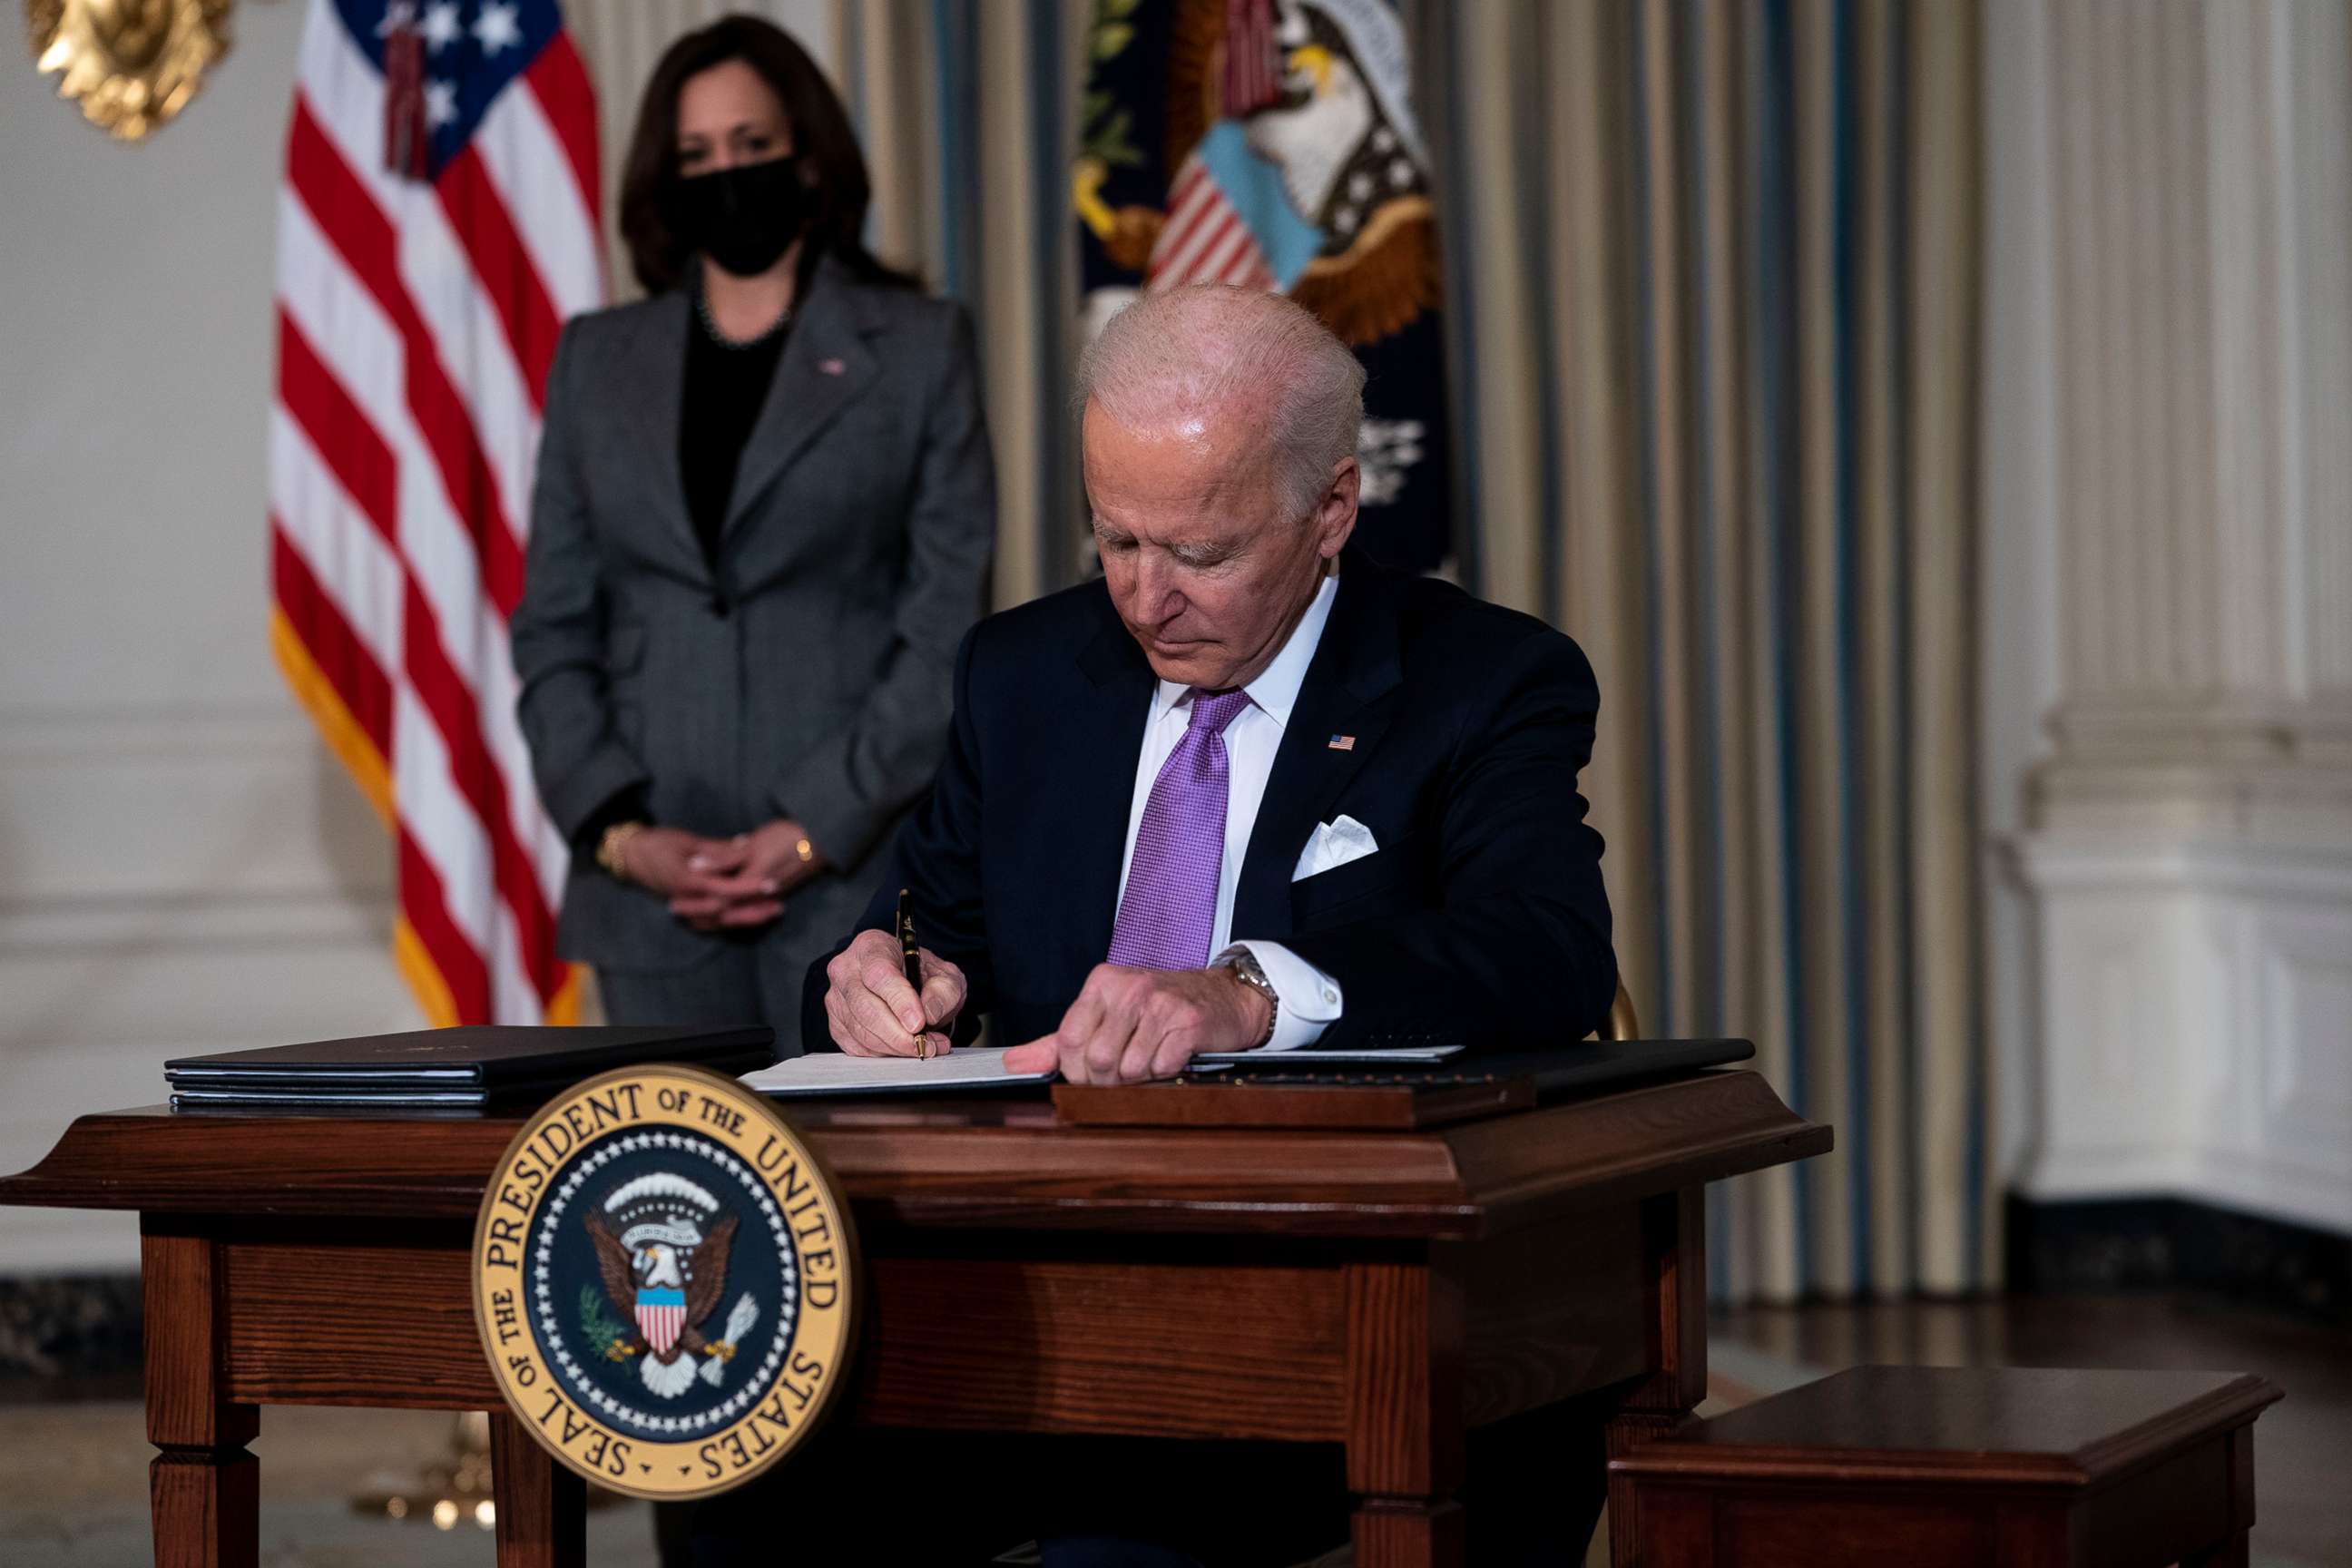 PHOTO: Vice President Kamala Harris looks on as President Joe Biden signs executives orders related to his racial equity agenda in the State Dining Room of the White House, Jan. 26, 2021.